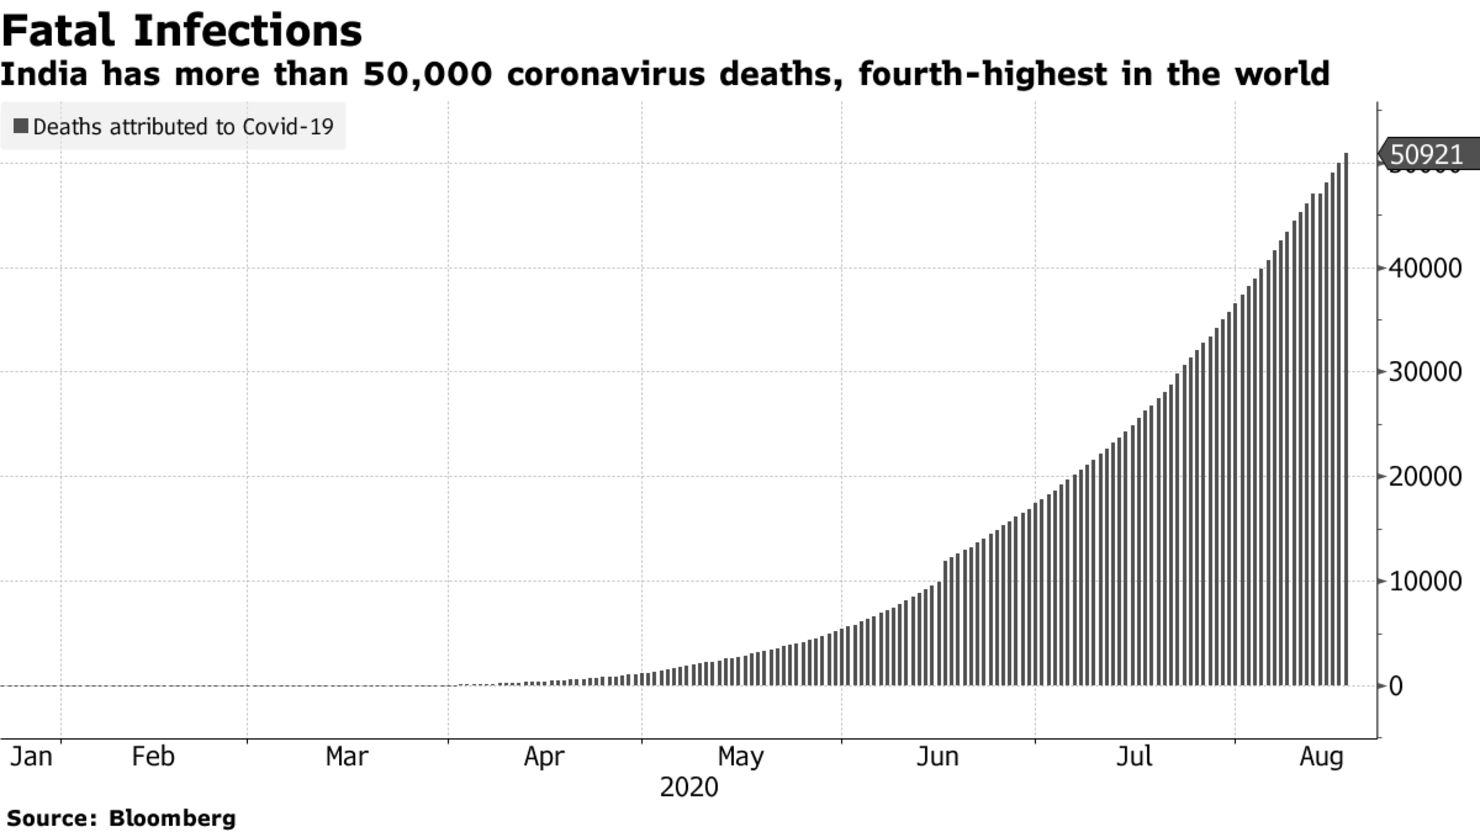 India has more than 50,000 coronavirus deaths, fourth-highest in the world